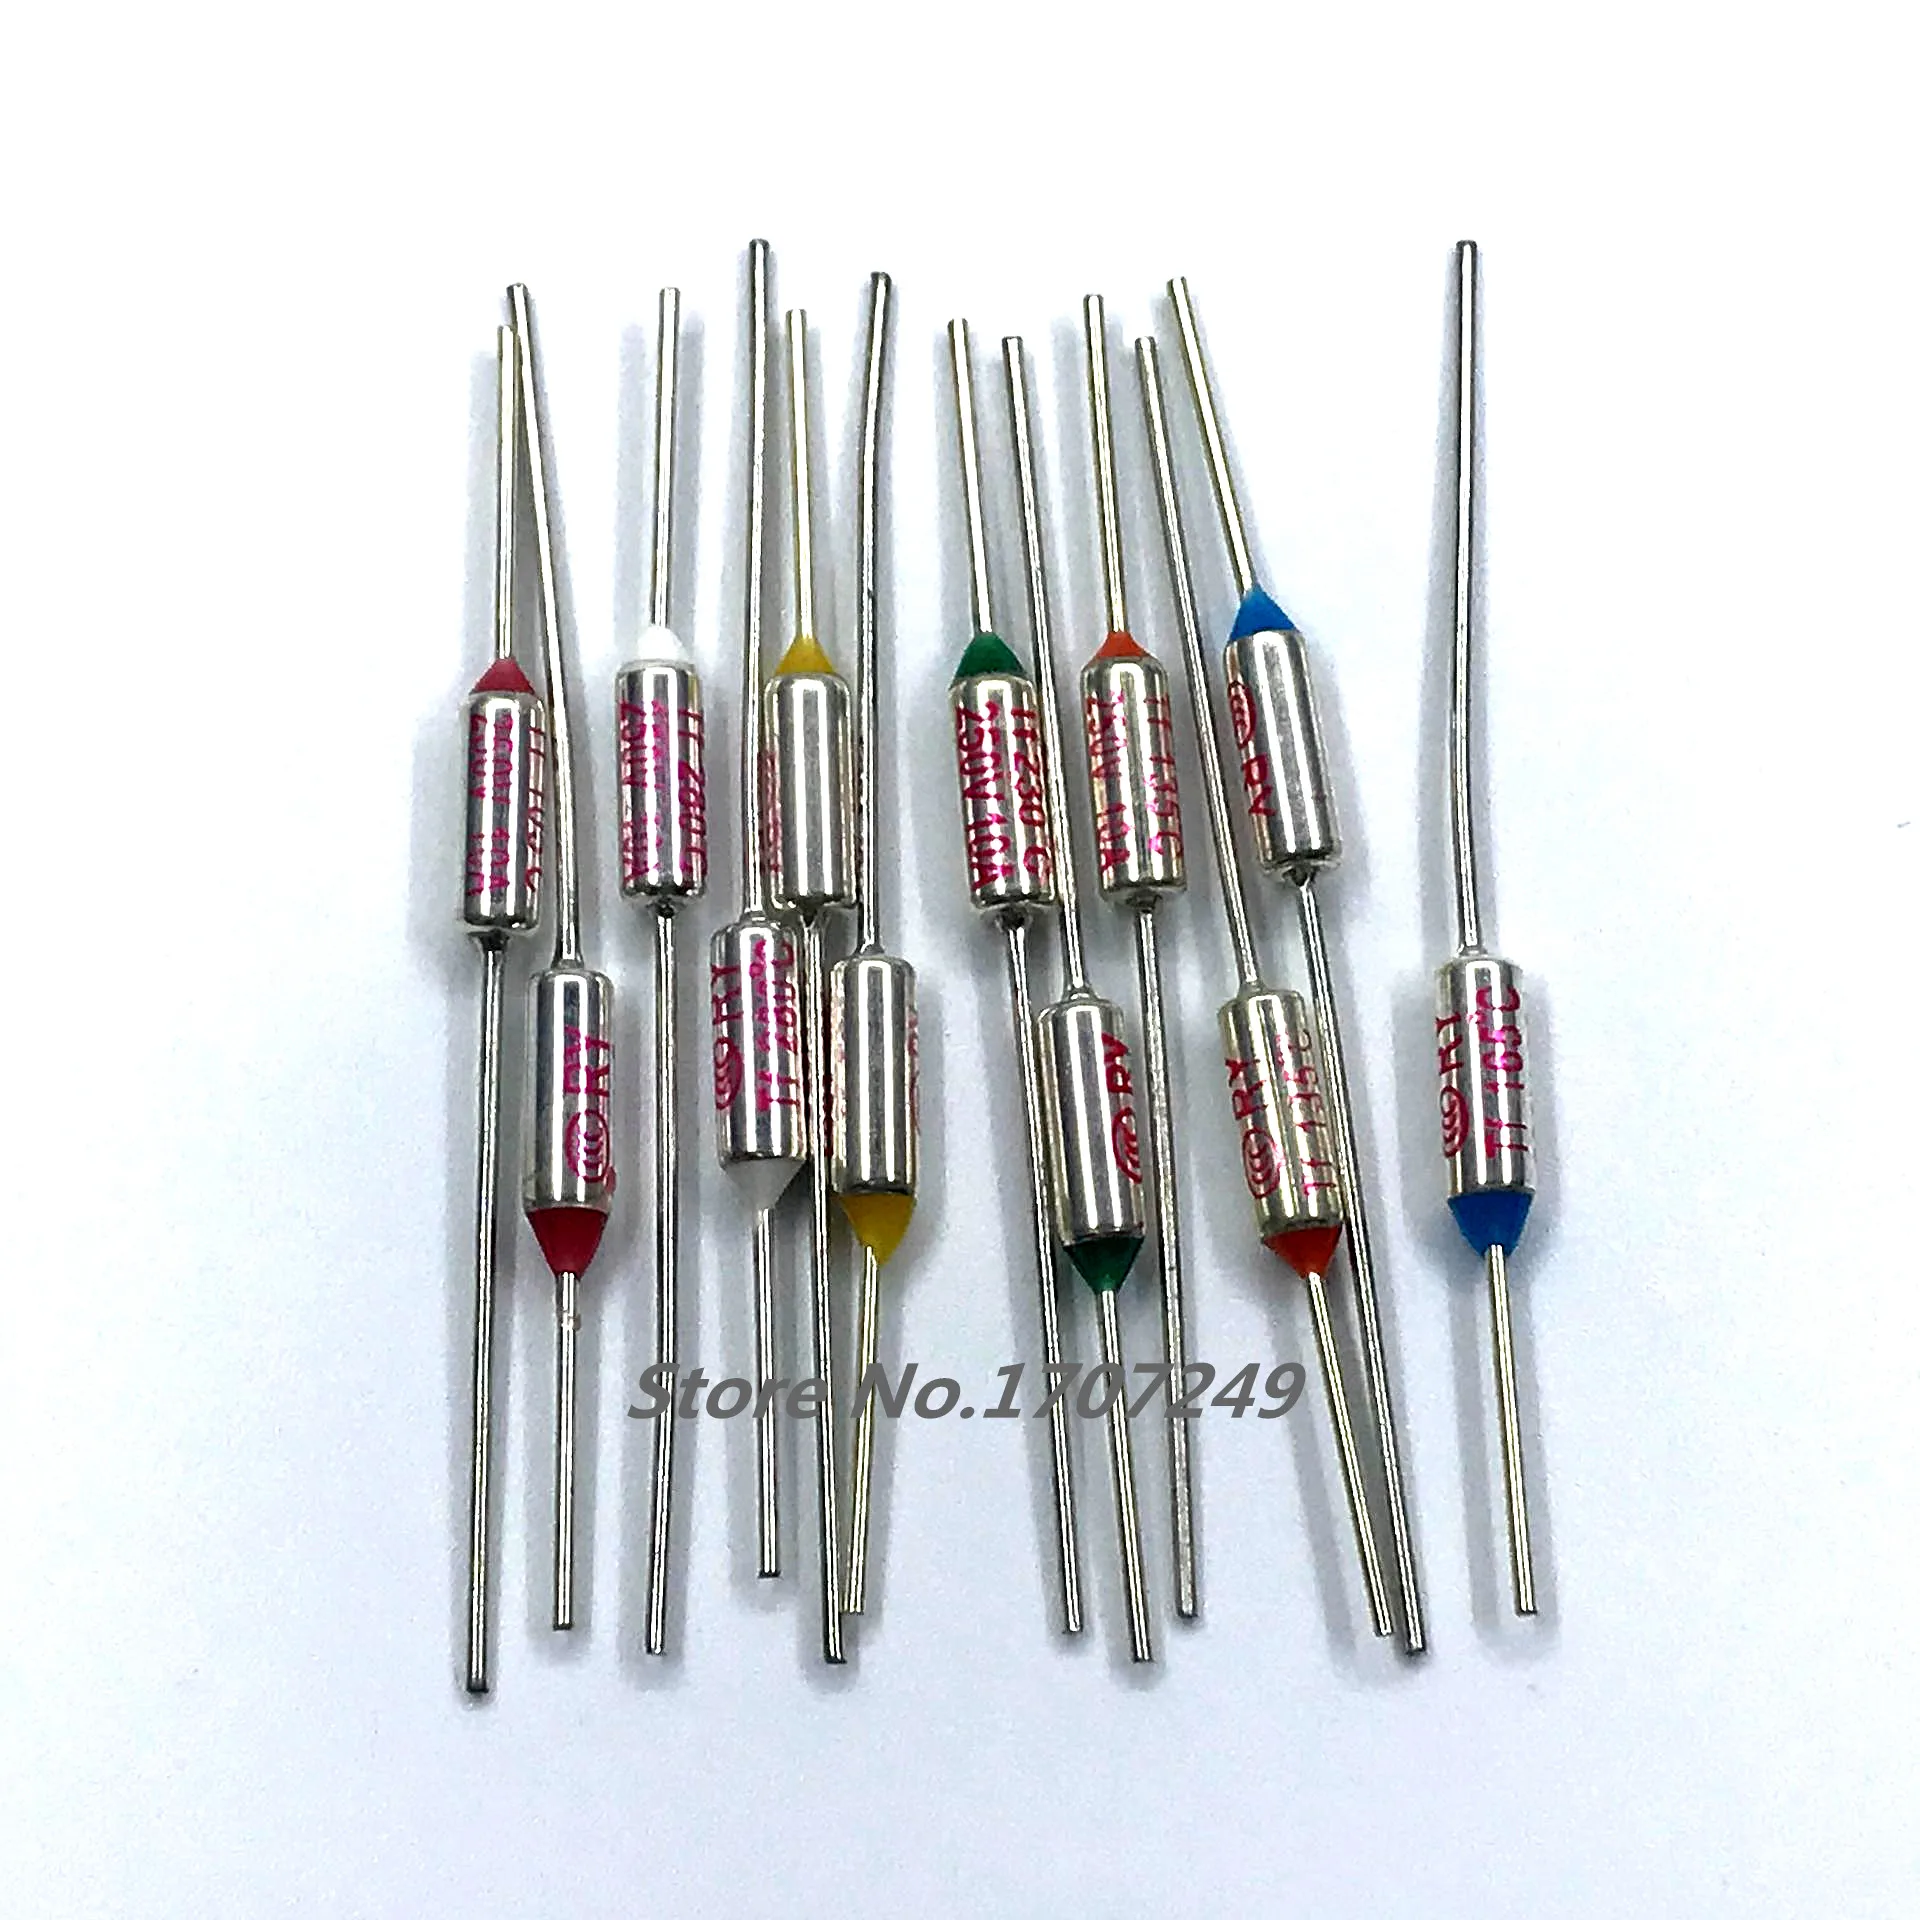 TF Thermal Fuse RY 10A/15A 250V Metal Thermal Fuse Temperature 60C to 300C 82 variety of temperatures for you to choose from